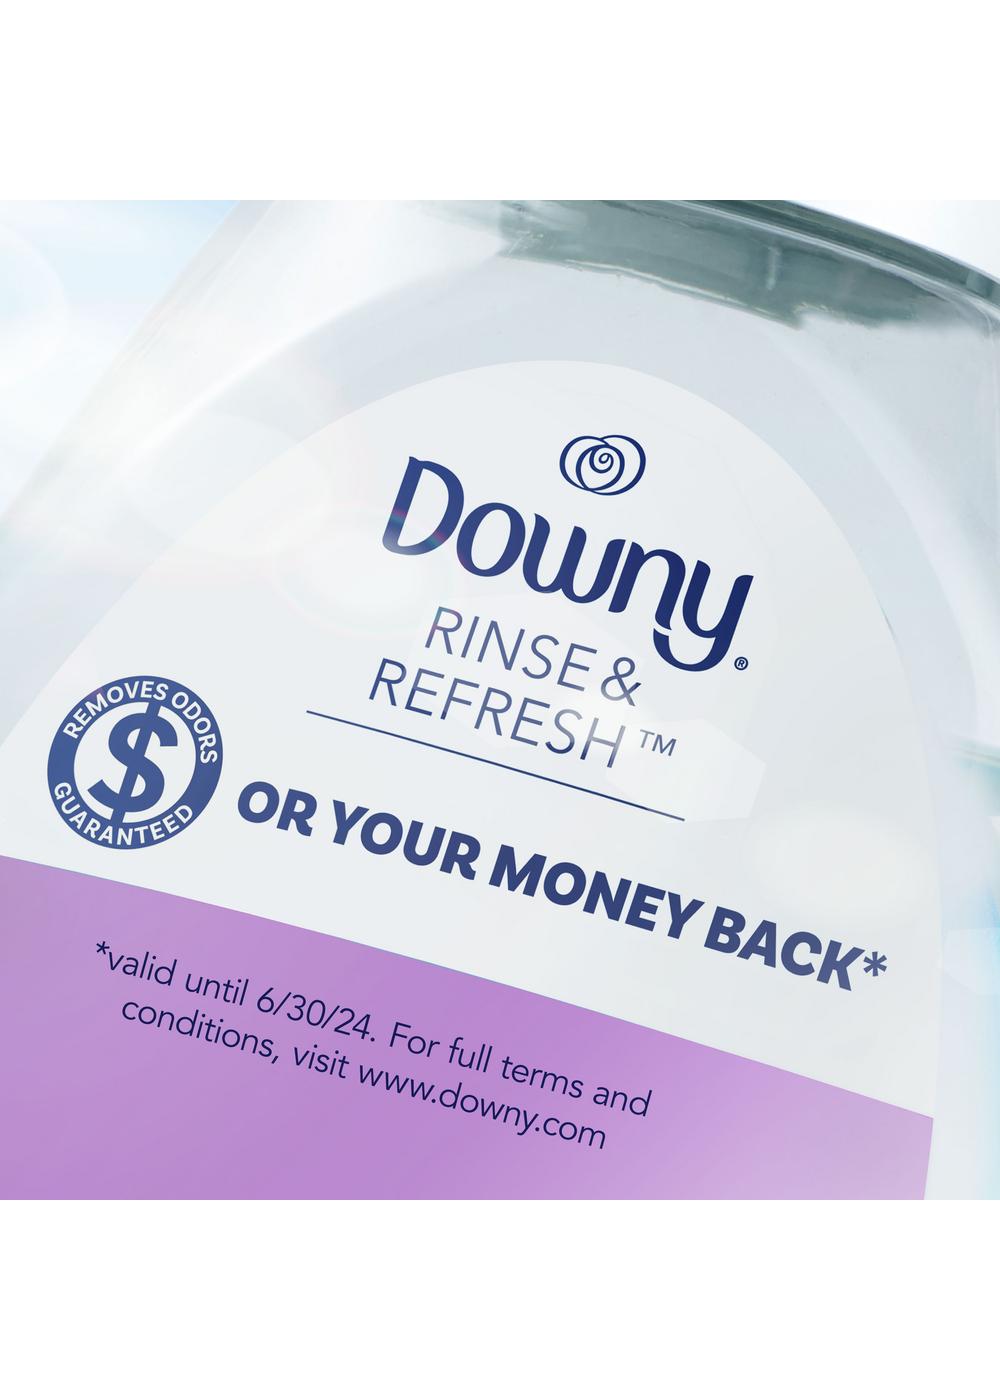 Downy Rinse & Refresh Laundry Odor Remover, 37 Loads - Fresh Lavender; image 7 of 8